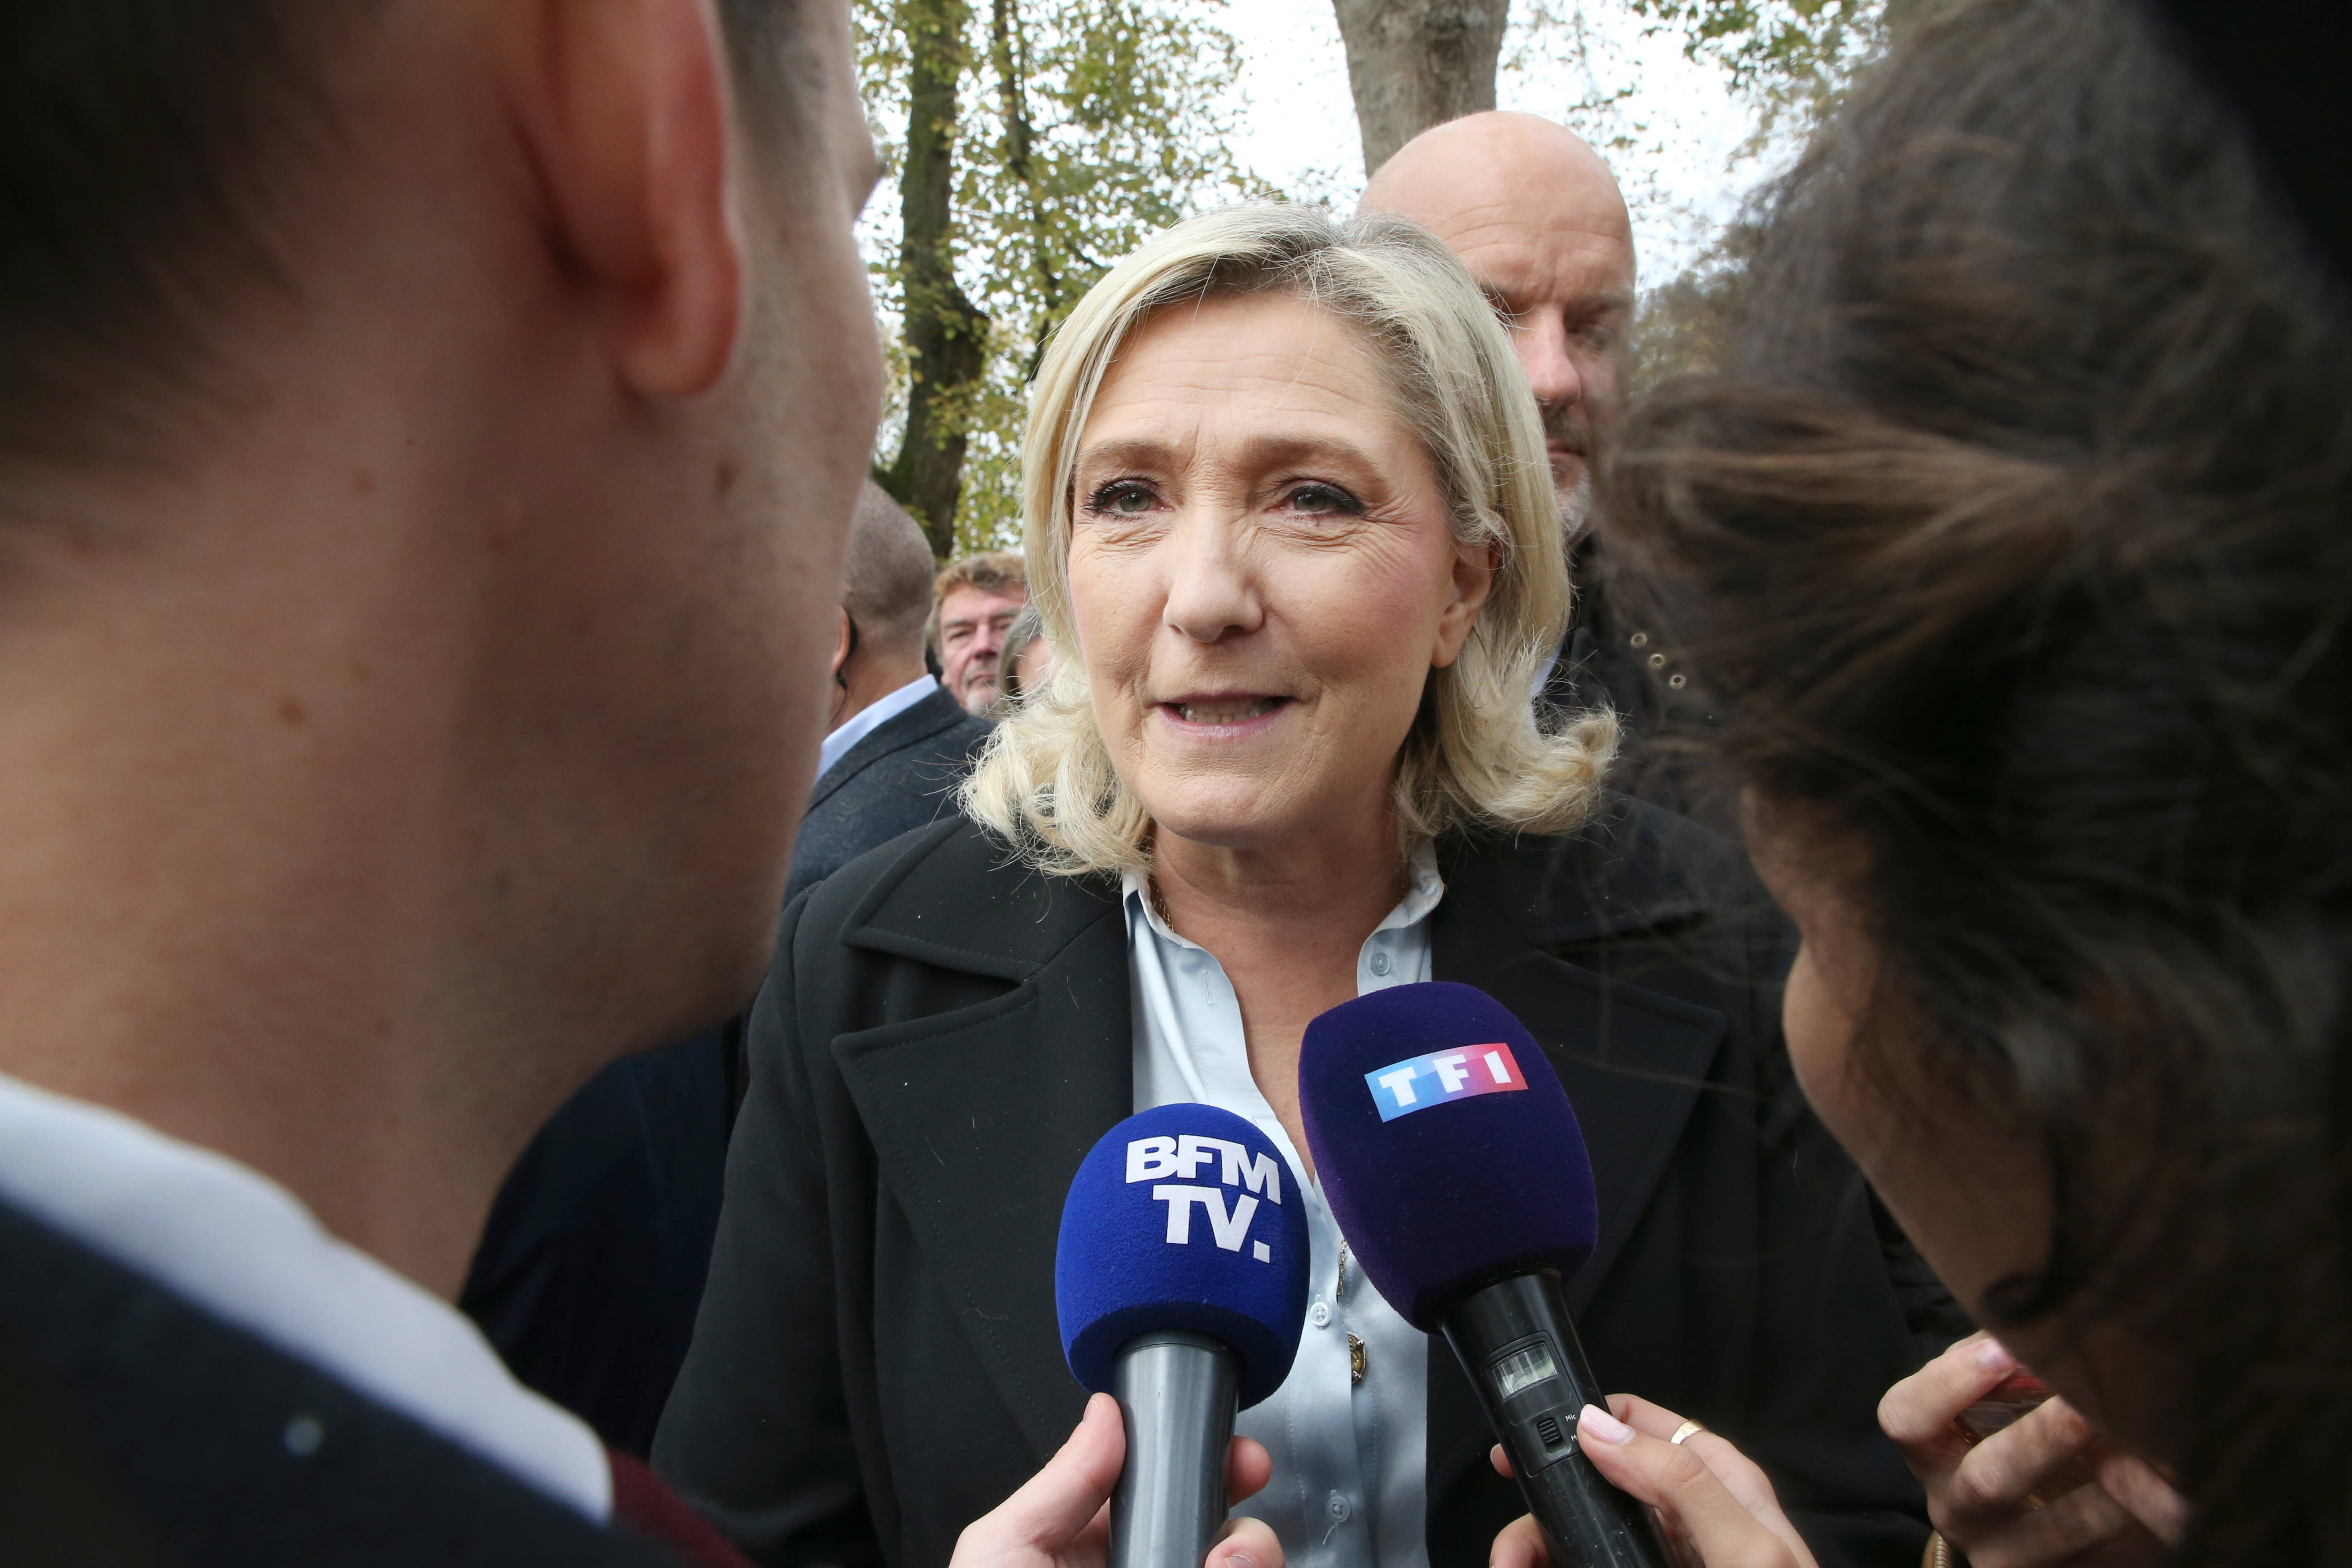 Marine Le Pen: “Salvini and Meloni must join forces with us in Europe”